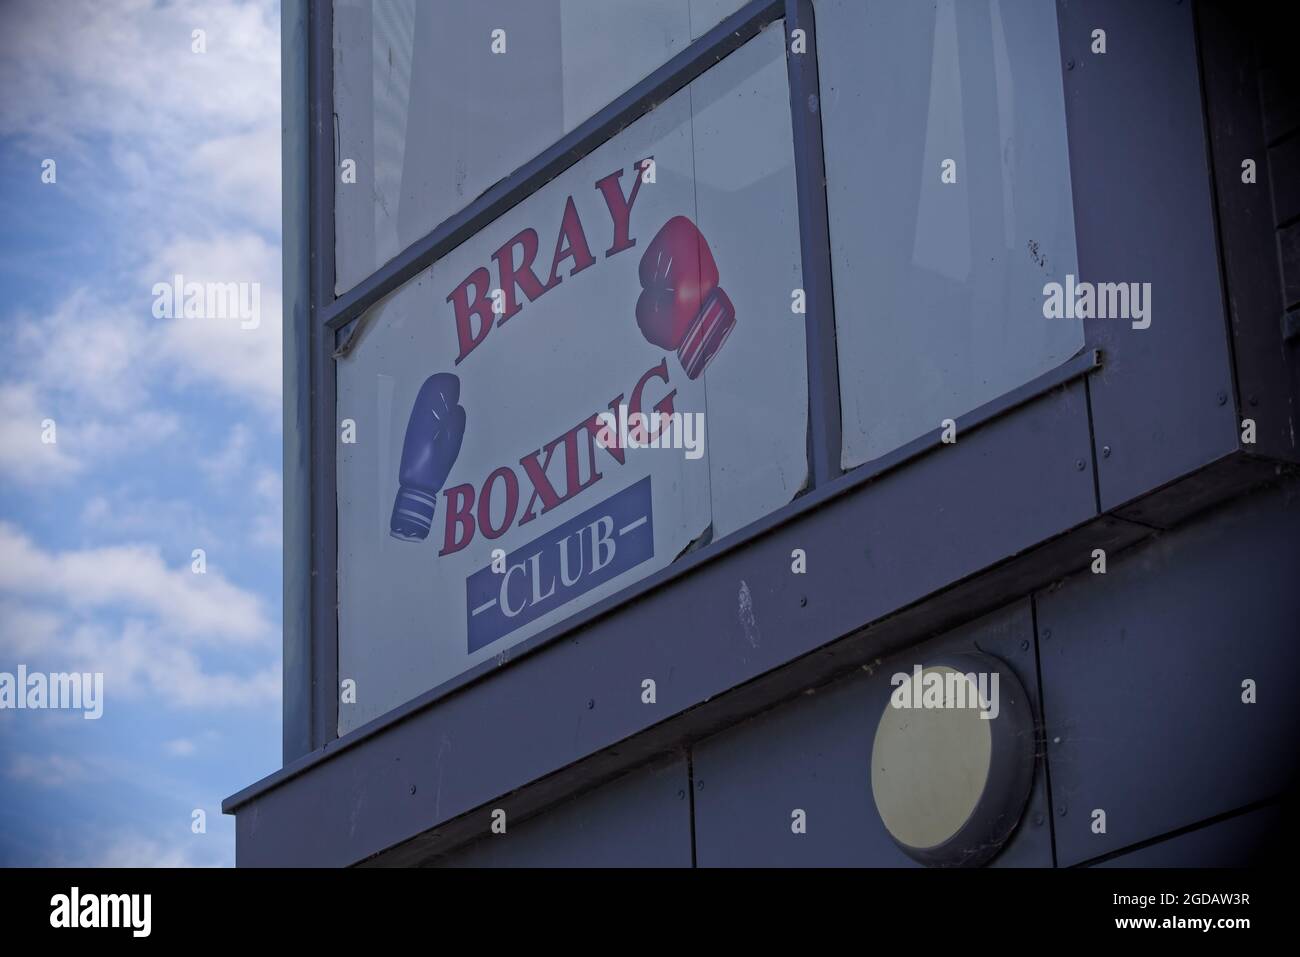 BRAY, IRLAND - 19. Juni 2021: Logo des Bray Boxing Clubs in Bray, County Wicklow, Irland. Stockfoto